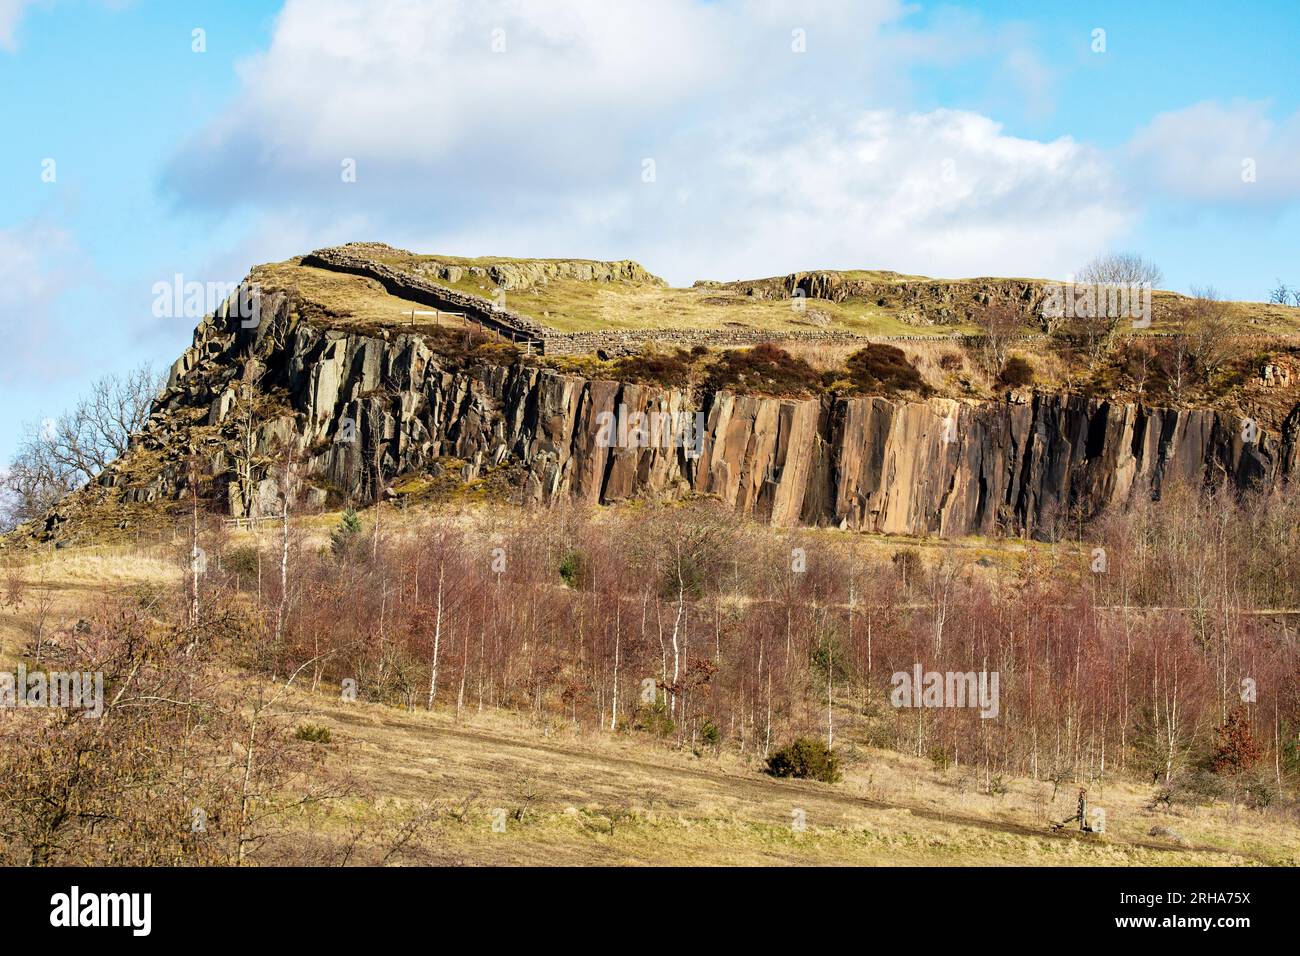 Hadrians Wall follows the line of Walltown Crags, part of the Whin Sill dolerite rocks near Greenhead, Northumberland Stock Photo